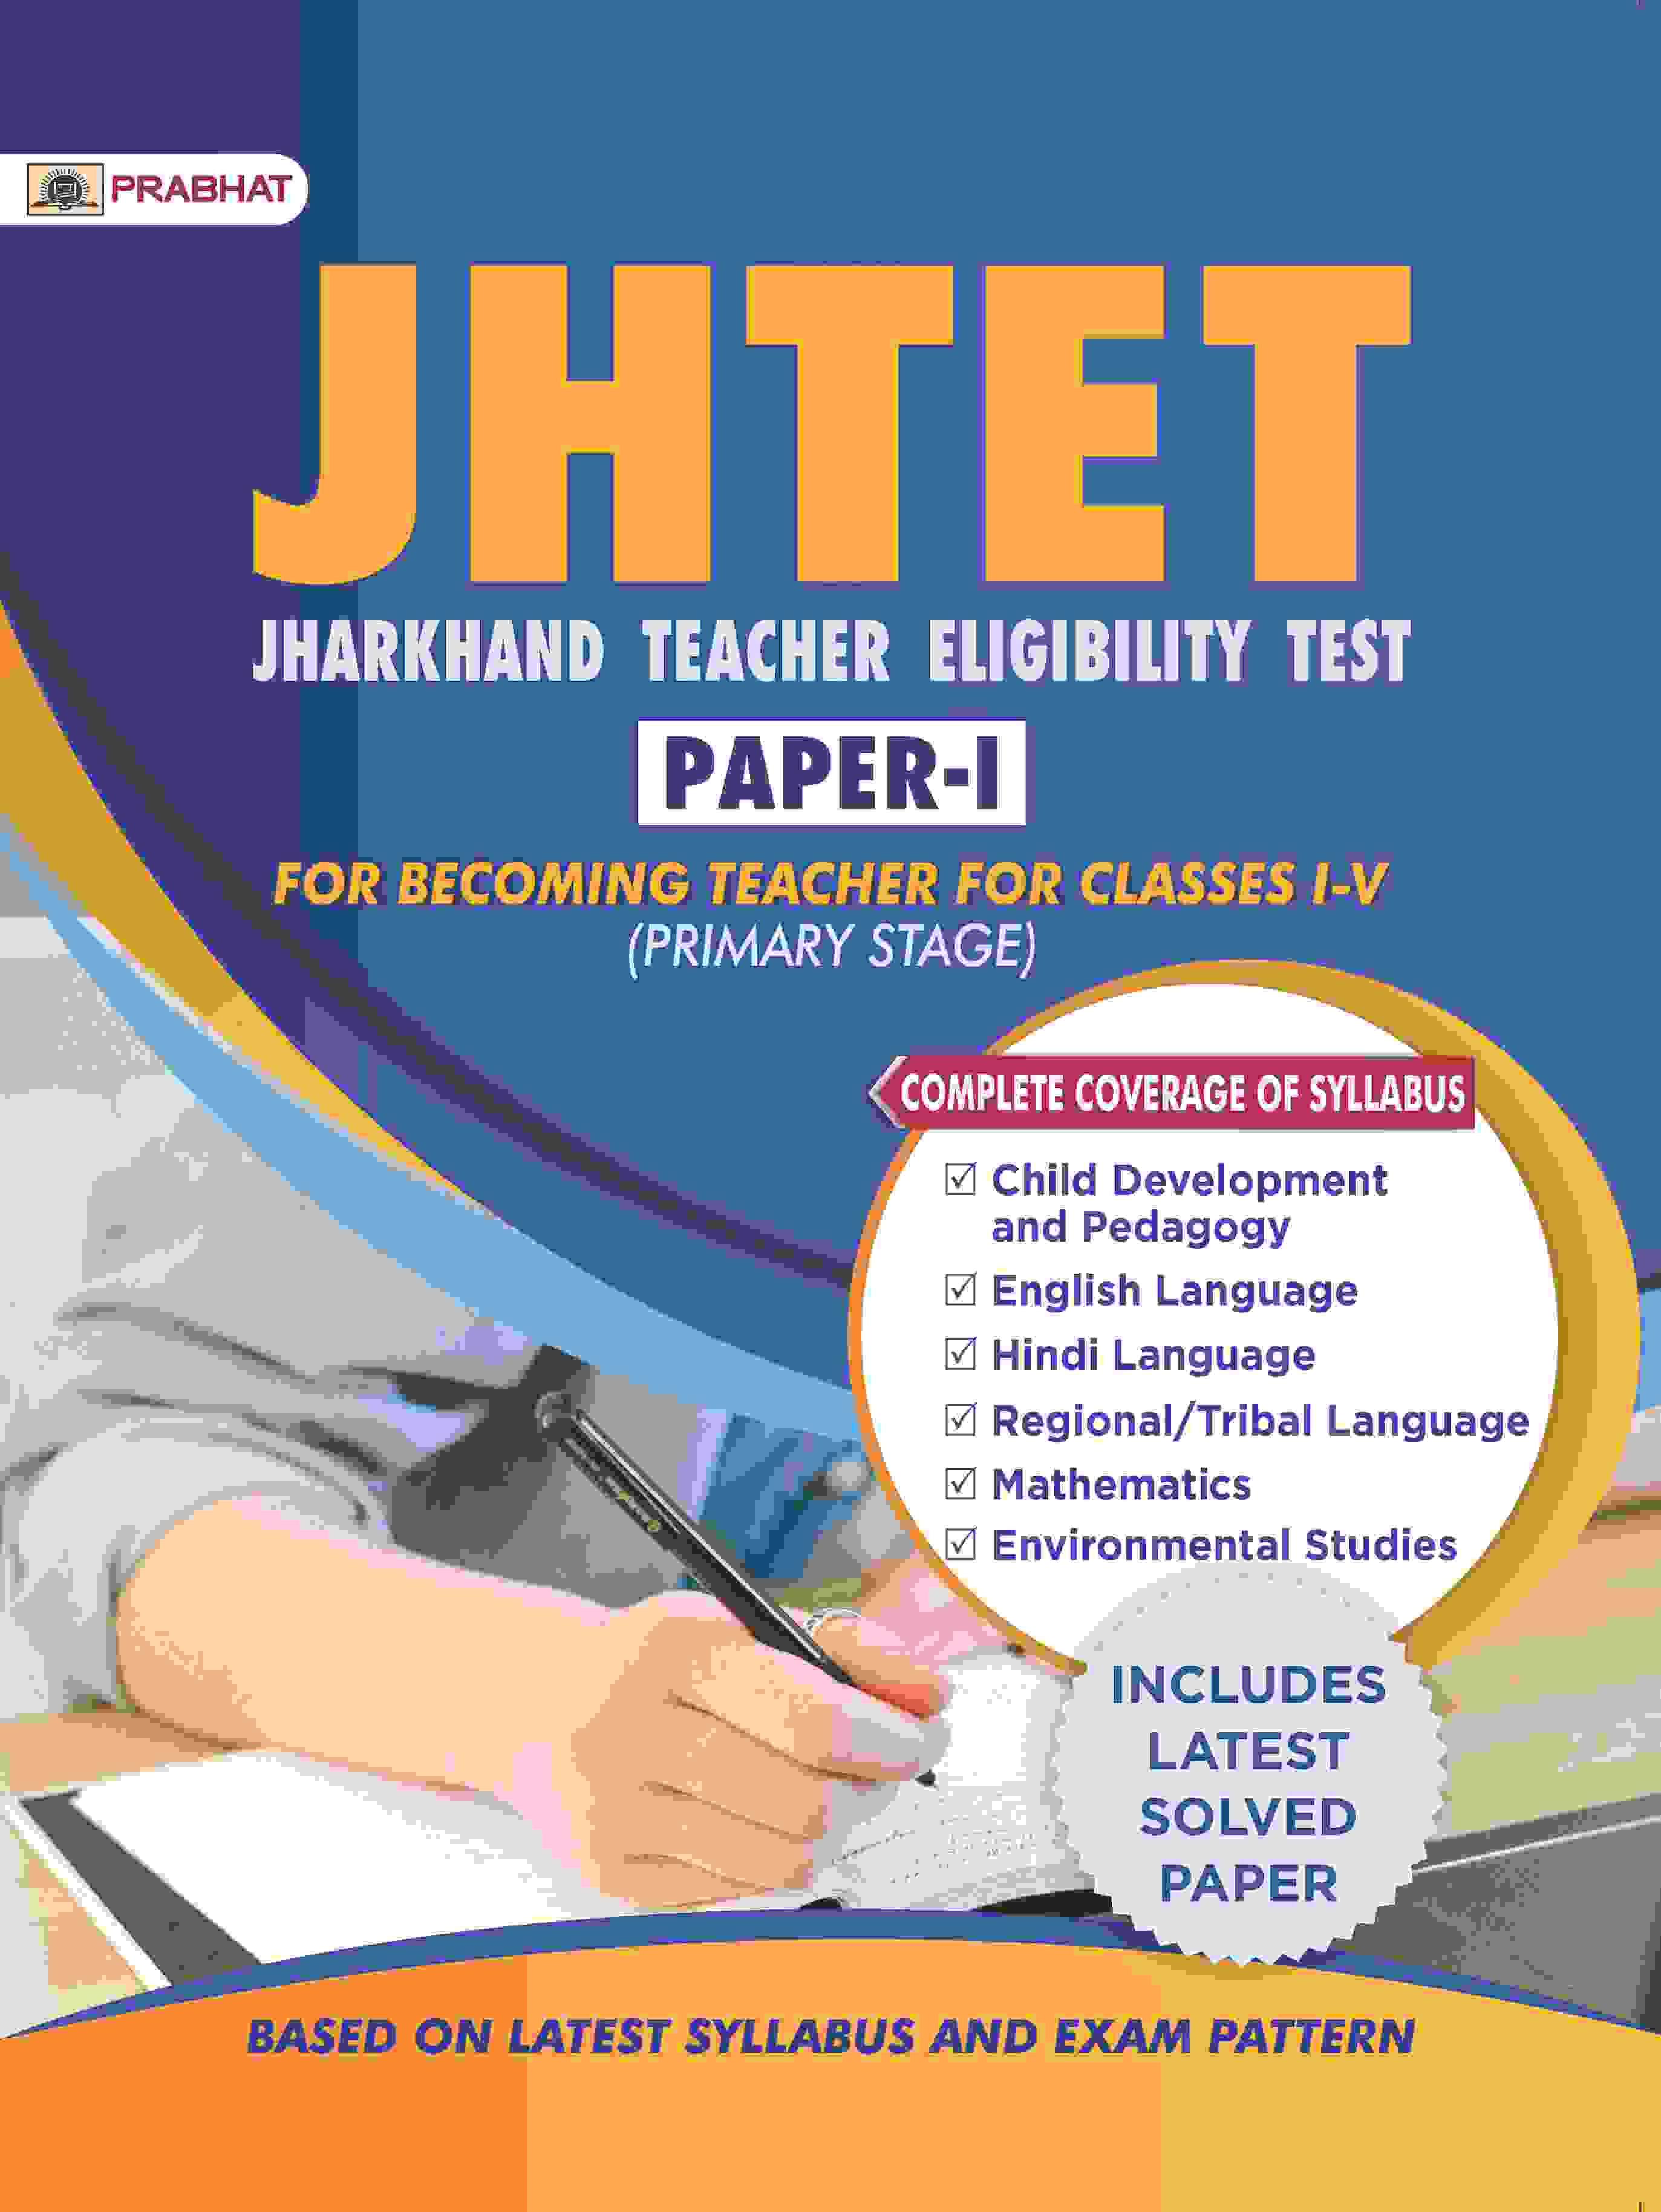 JHTET Jharkhand Teacher Eligibility Test Paper-1 for Becoming Teacher for Classes I-V (Primary Stage)